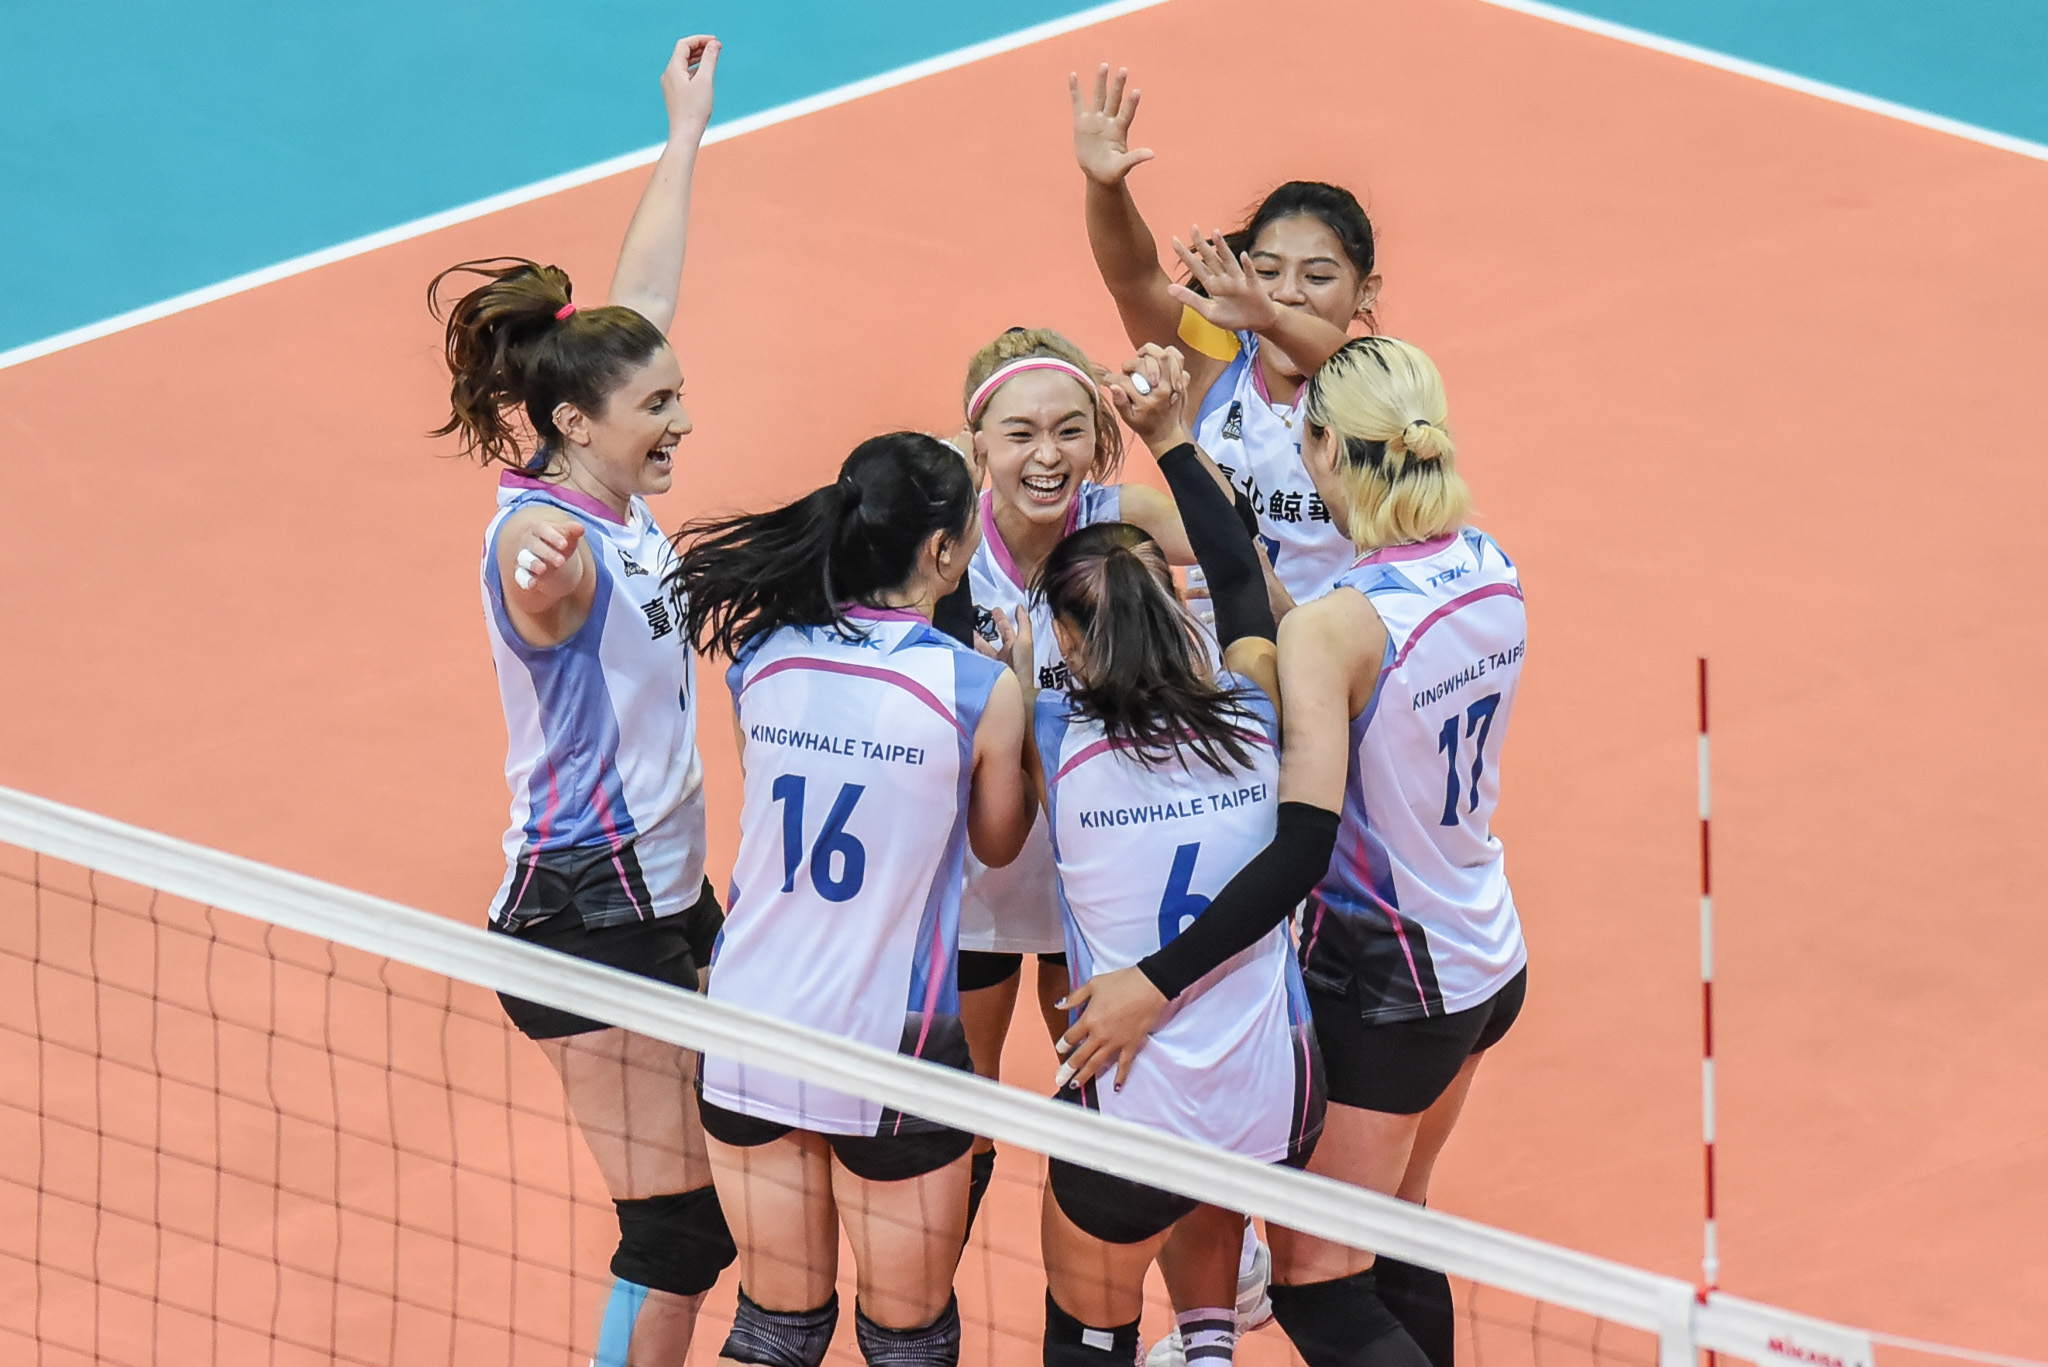 Taiwan-based KingWhale squad in the PVL Invitationals. 